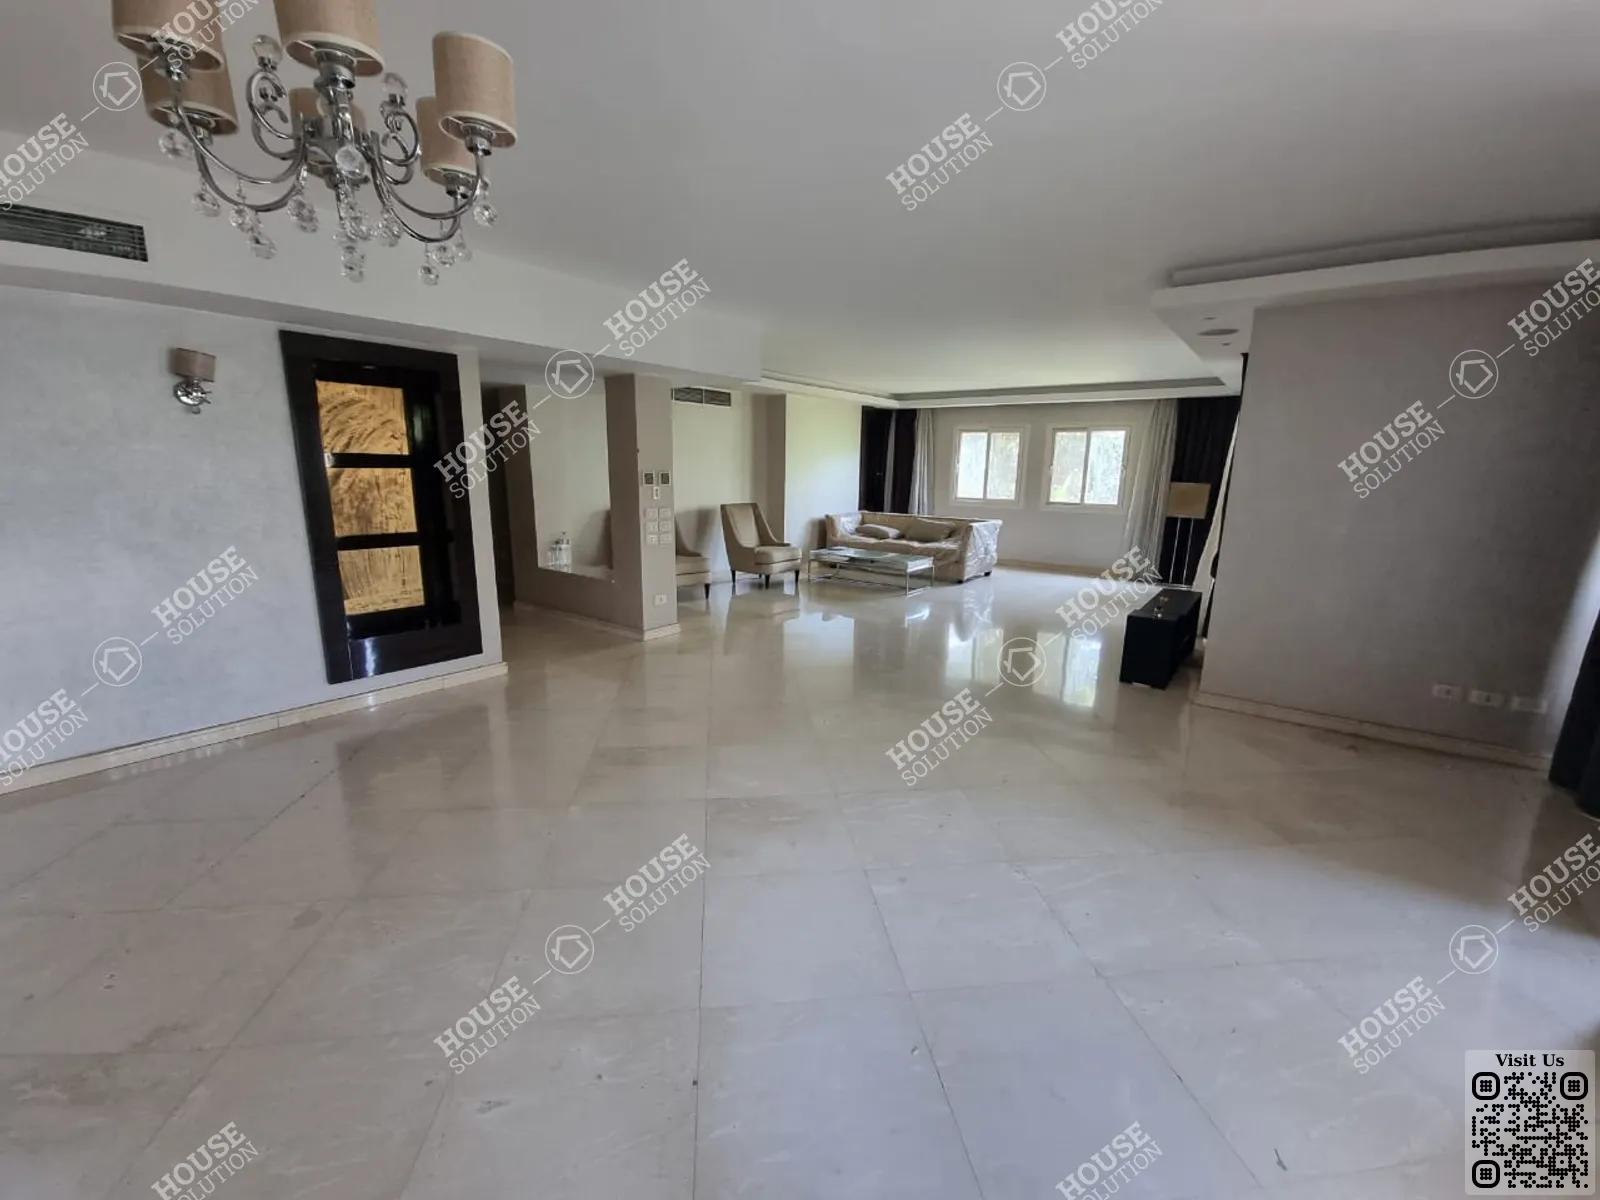 RECEPTION  @ Apartments For Rent In Maadi Maadi Sarayat Area: 300 m² consists of 4 Bedrooms 4 Bathrooms Modern furnished 5 stars #5536-0